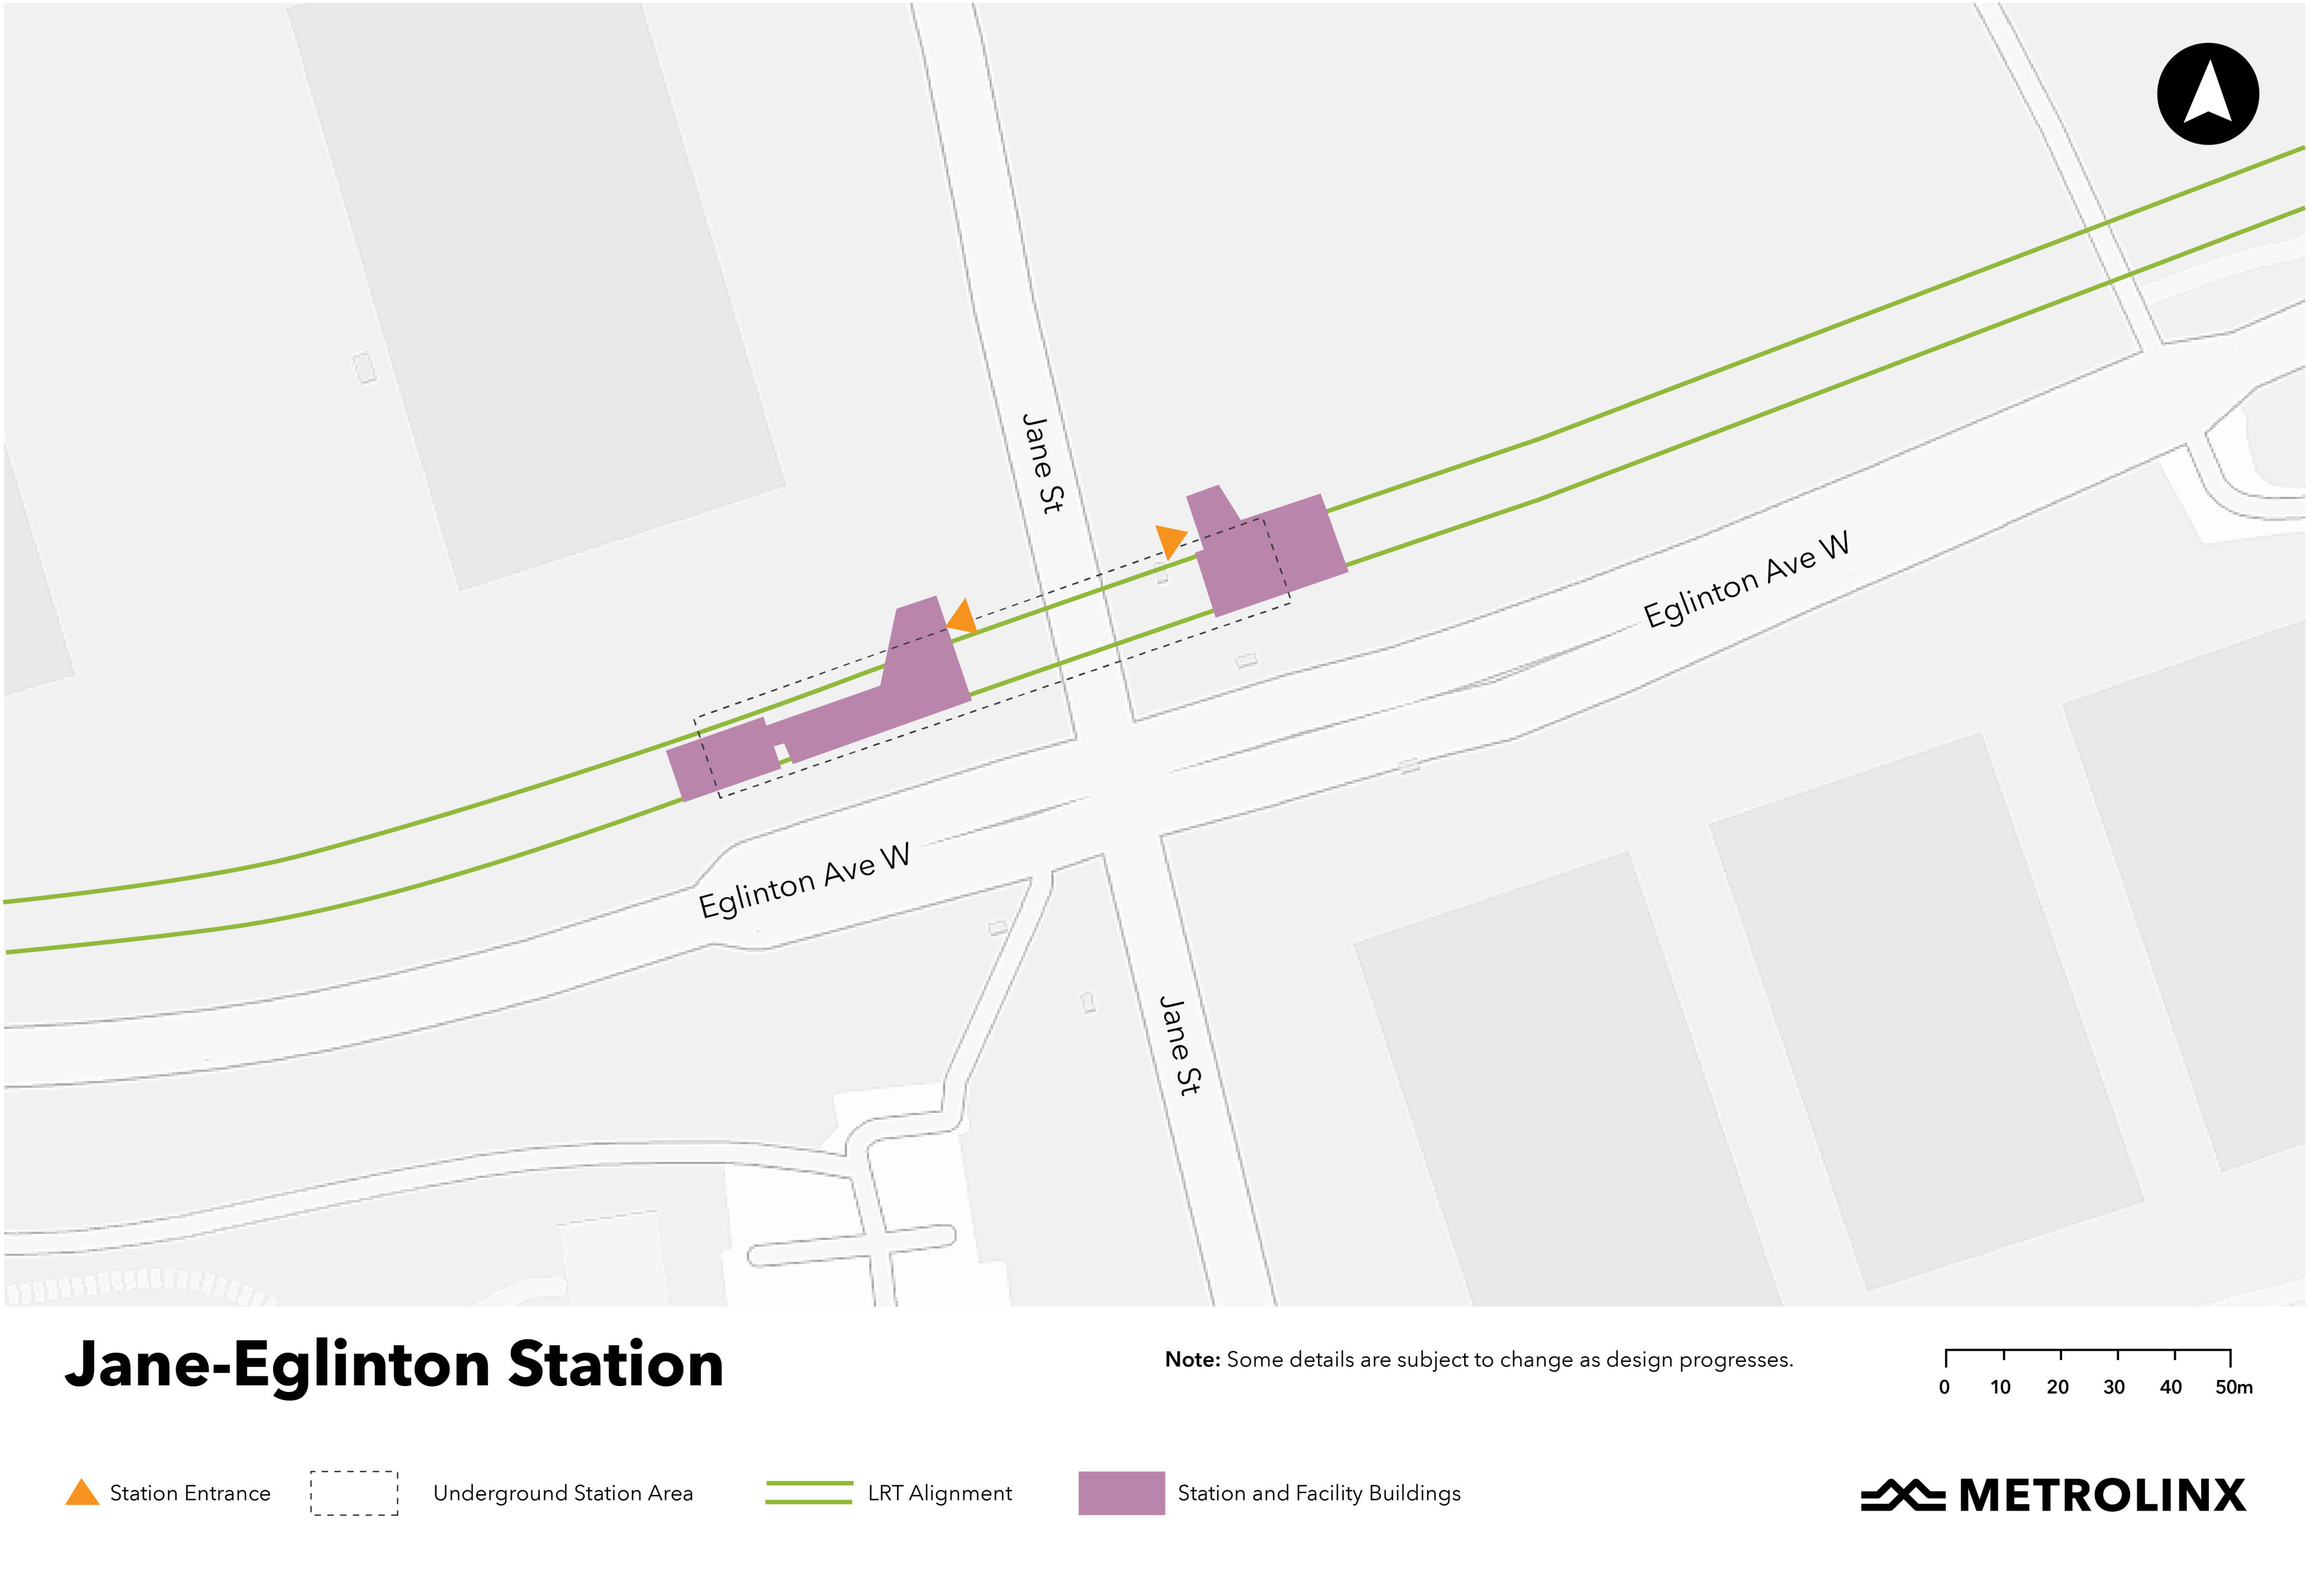 A map of the area around the future Jane-Eglinton Station